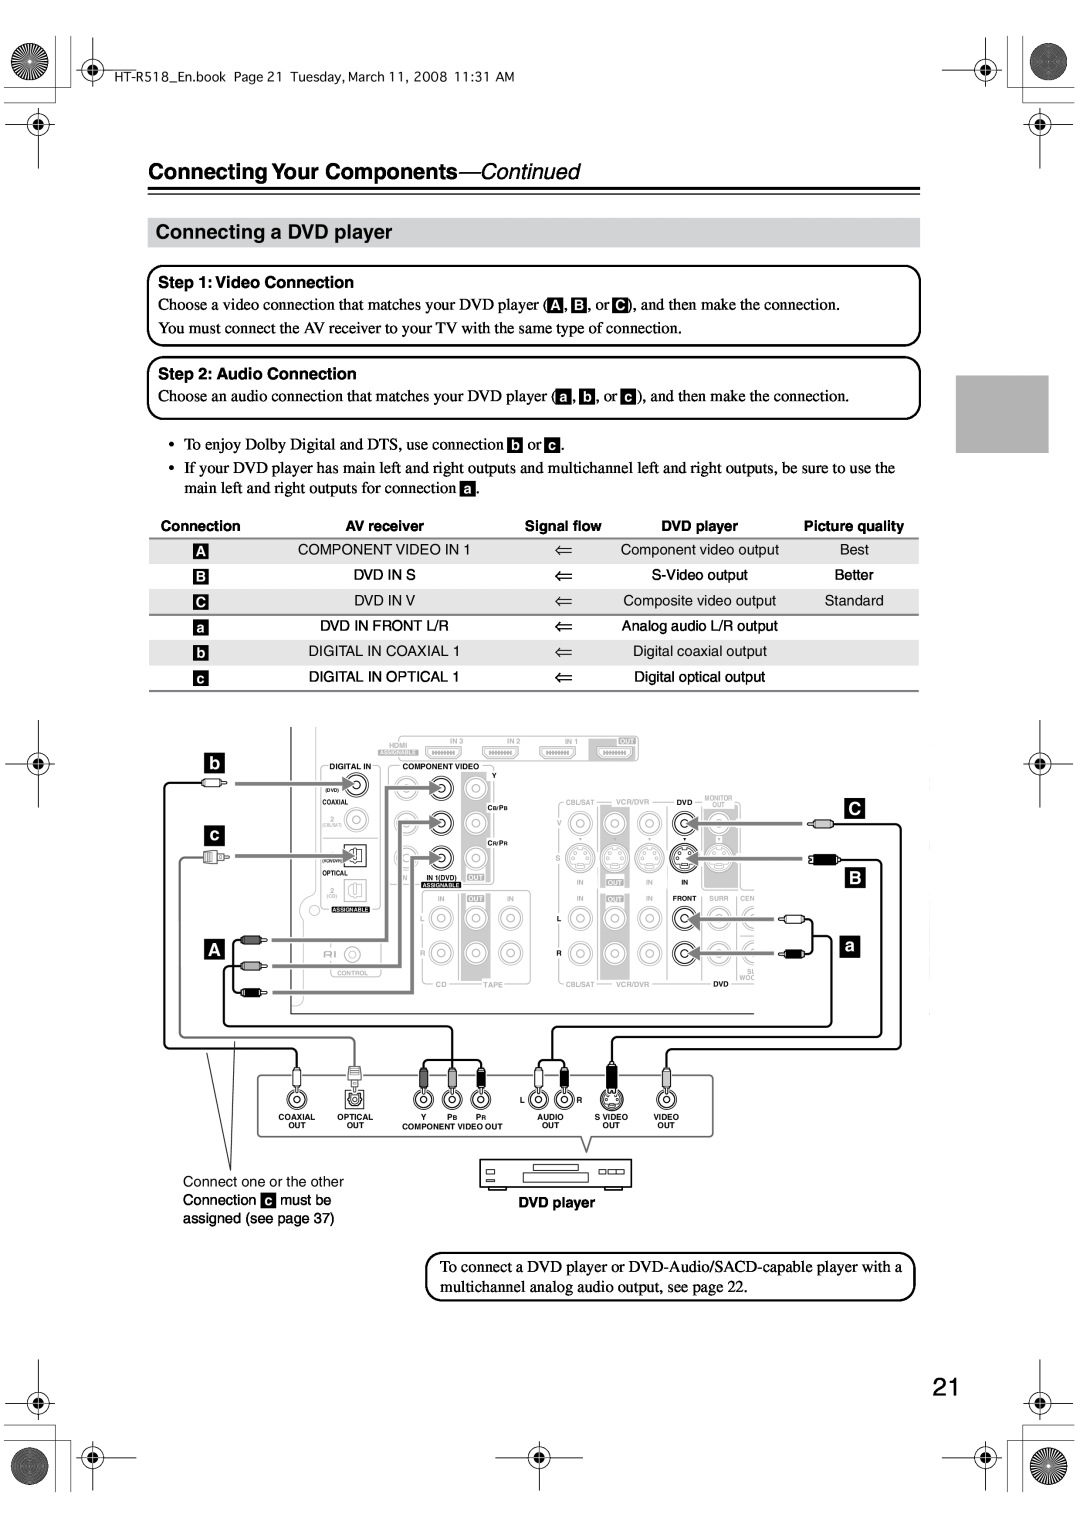 Onkyo HT-R518 instruction manual Connecting a DVD player, Connecting Your Components-Continued 